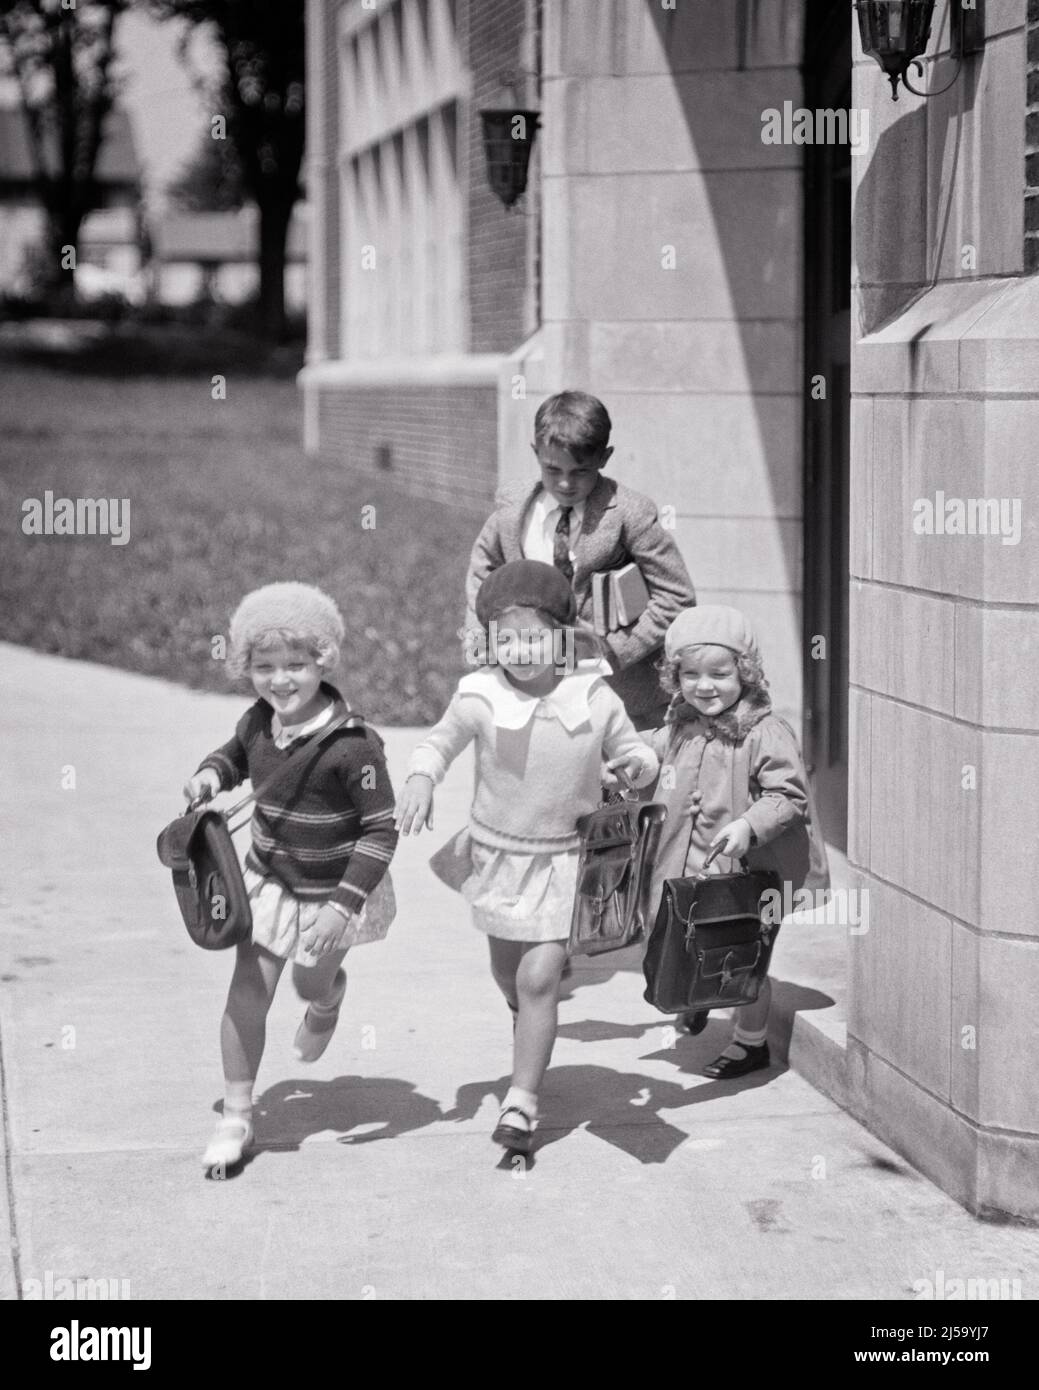 1930s FOUR KIDS RUNNING OUT OF SCHOOL BUILDING THREE GIRLS ONE BOY CARRYING BOOKS AND BOOK BAGS - j3930 HAR001 HARS 1 JUVENILE ELEMENTARY PLEASED JOY LIFESTYLE SATISFACTION ARCHITECTURE FEMALES HEALTHINESS COPY SPACE FRIENDSHIP FULL-LENGTH PERSONS CLOTH MALES BUILDINGS SUNNY DIAPER B&W FREEDOM SCHOOLS GRADE HAPPINESS CHEERFUL HIGH ANGLE PROPERTY VICTORY AND EXCITEMENT KNOWLEDGE MARY JANE DIAPERS END OF DAY PRIMARY SMILES SWEATERS REAL ESTATE STRUCTURES JOYFUL STYLISH EDIFICE BERETS GRADE SCHOOL GROWTH BLACK AND WHITE BOOK BAG CAUCASIAN ETHNICITY HAR001 OLD FASHIONED Stock Photo